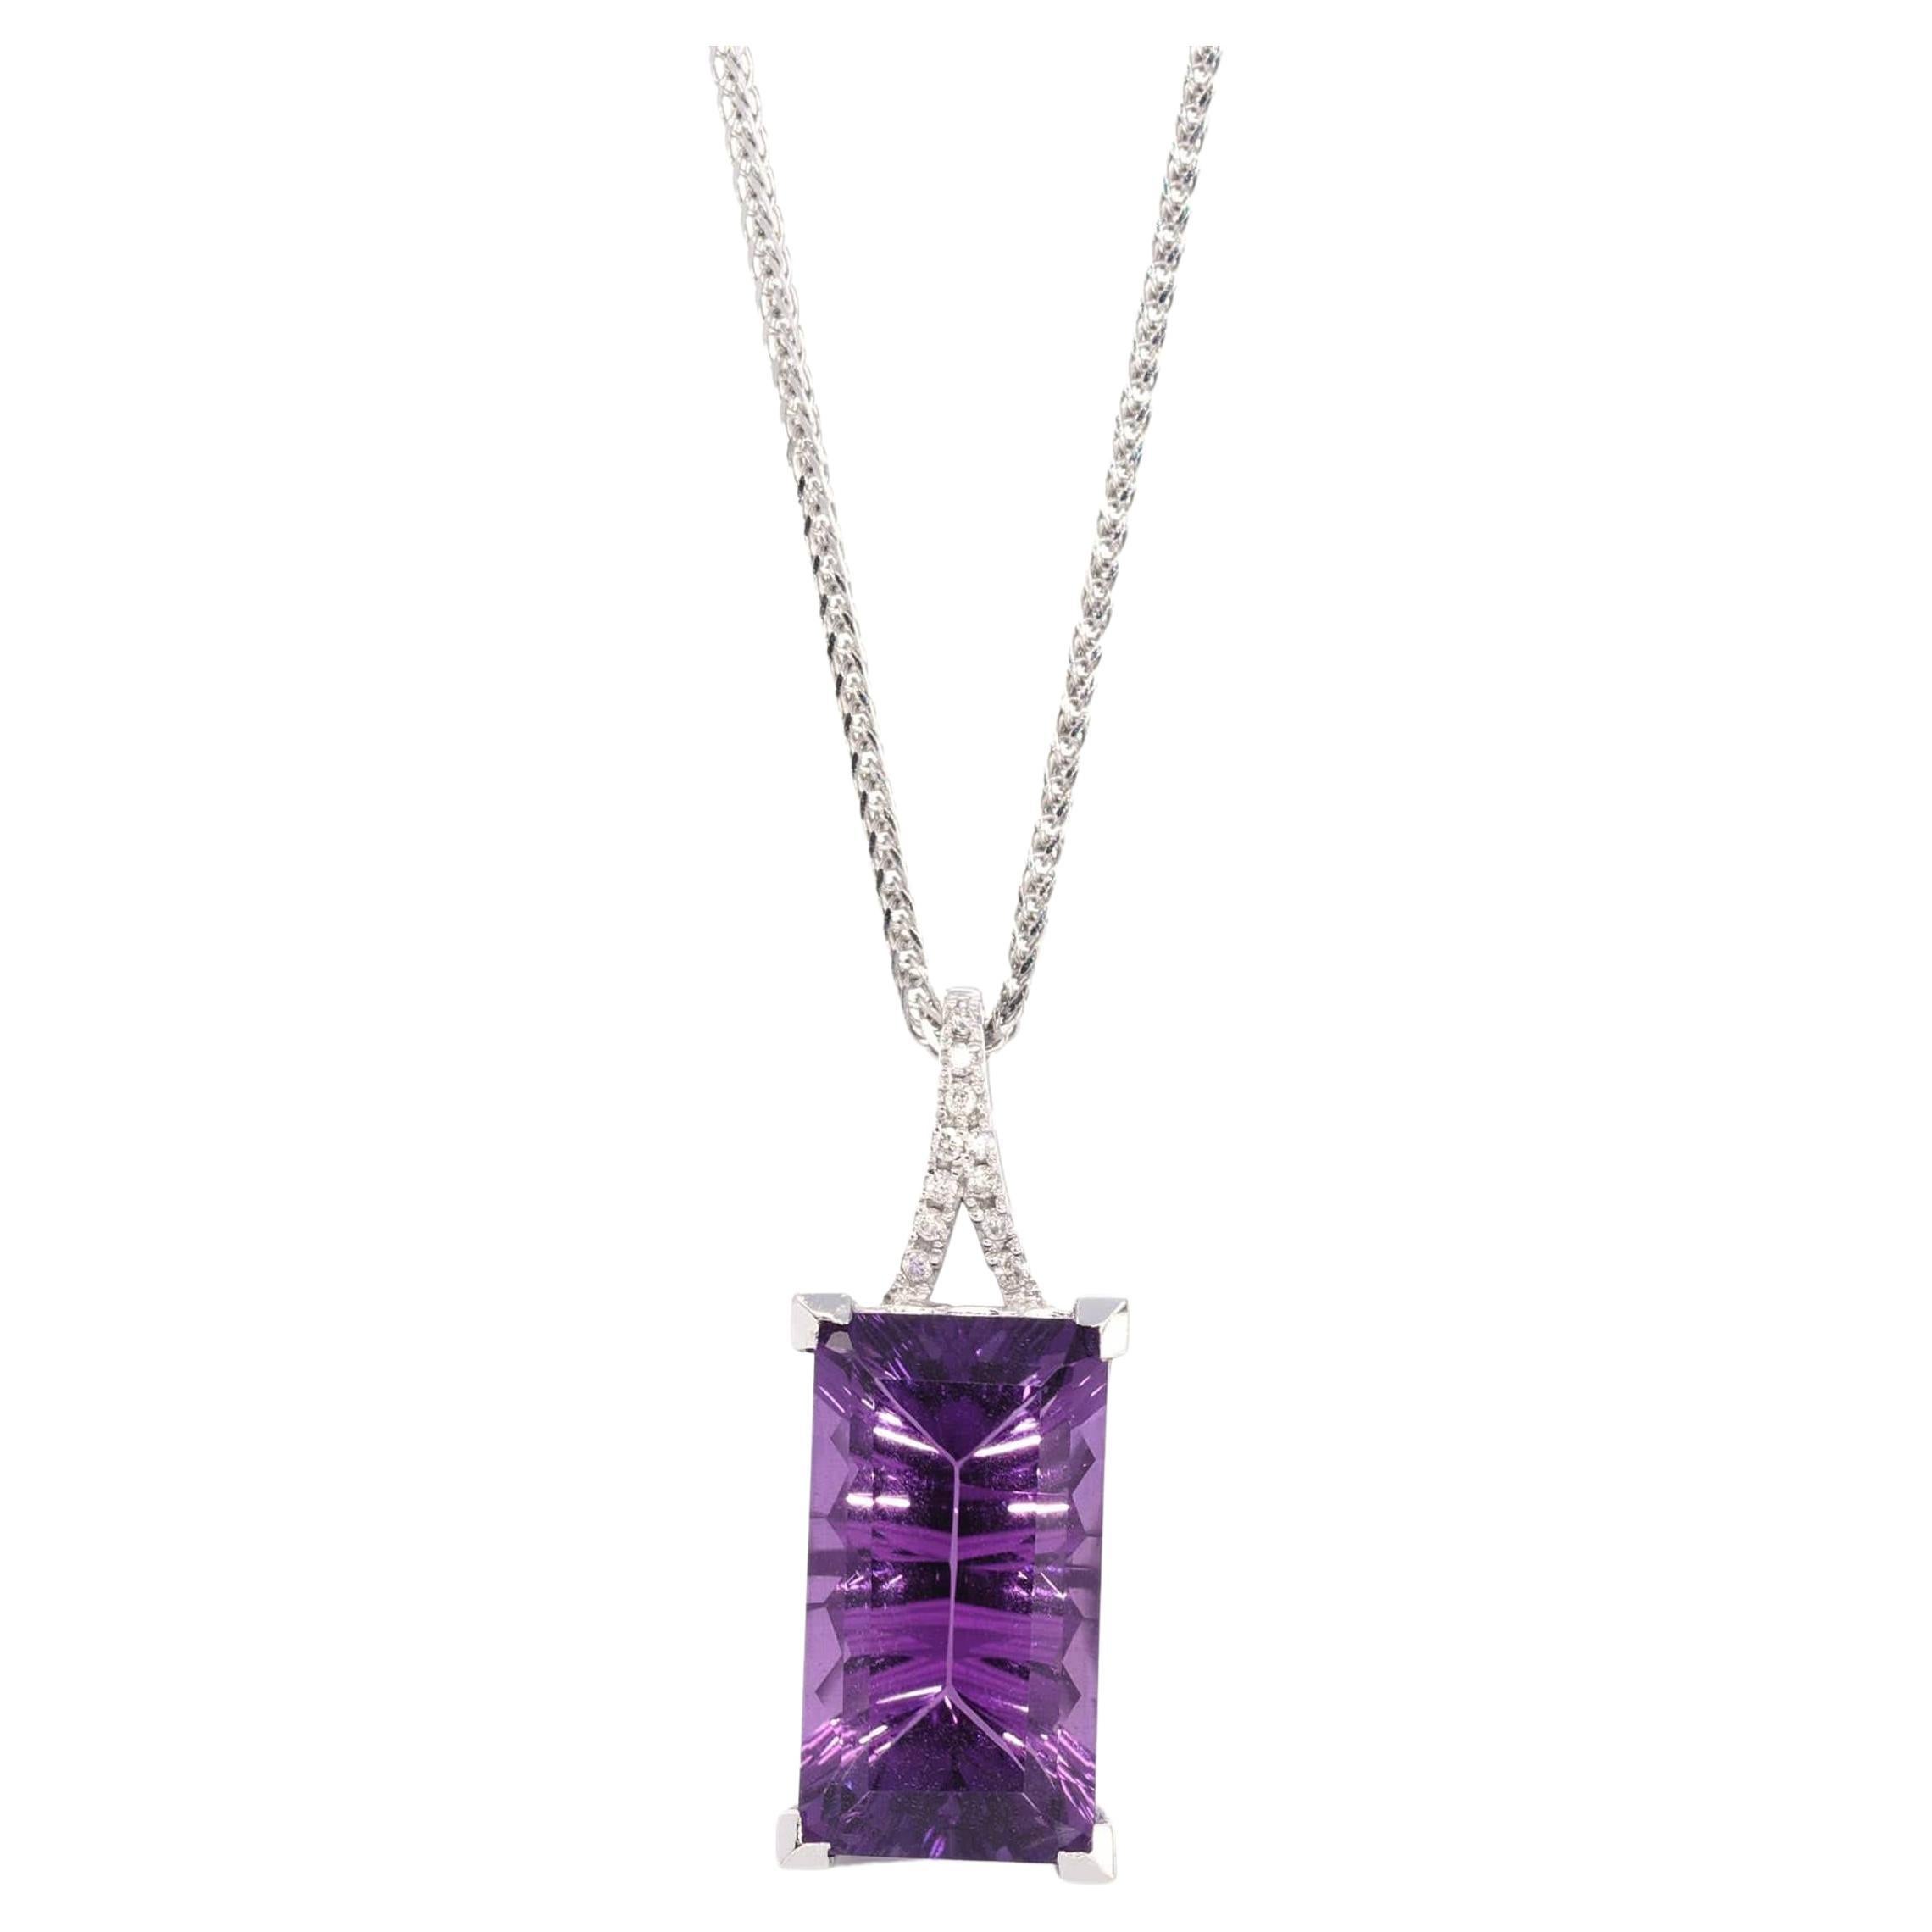 14k White Gold Genuine AAA Royal Amethyst Pendant Necklace